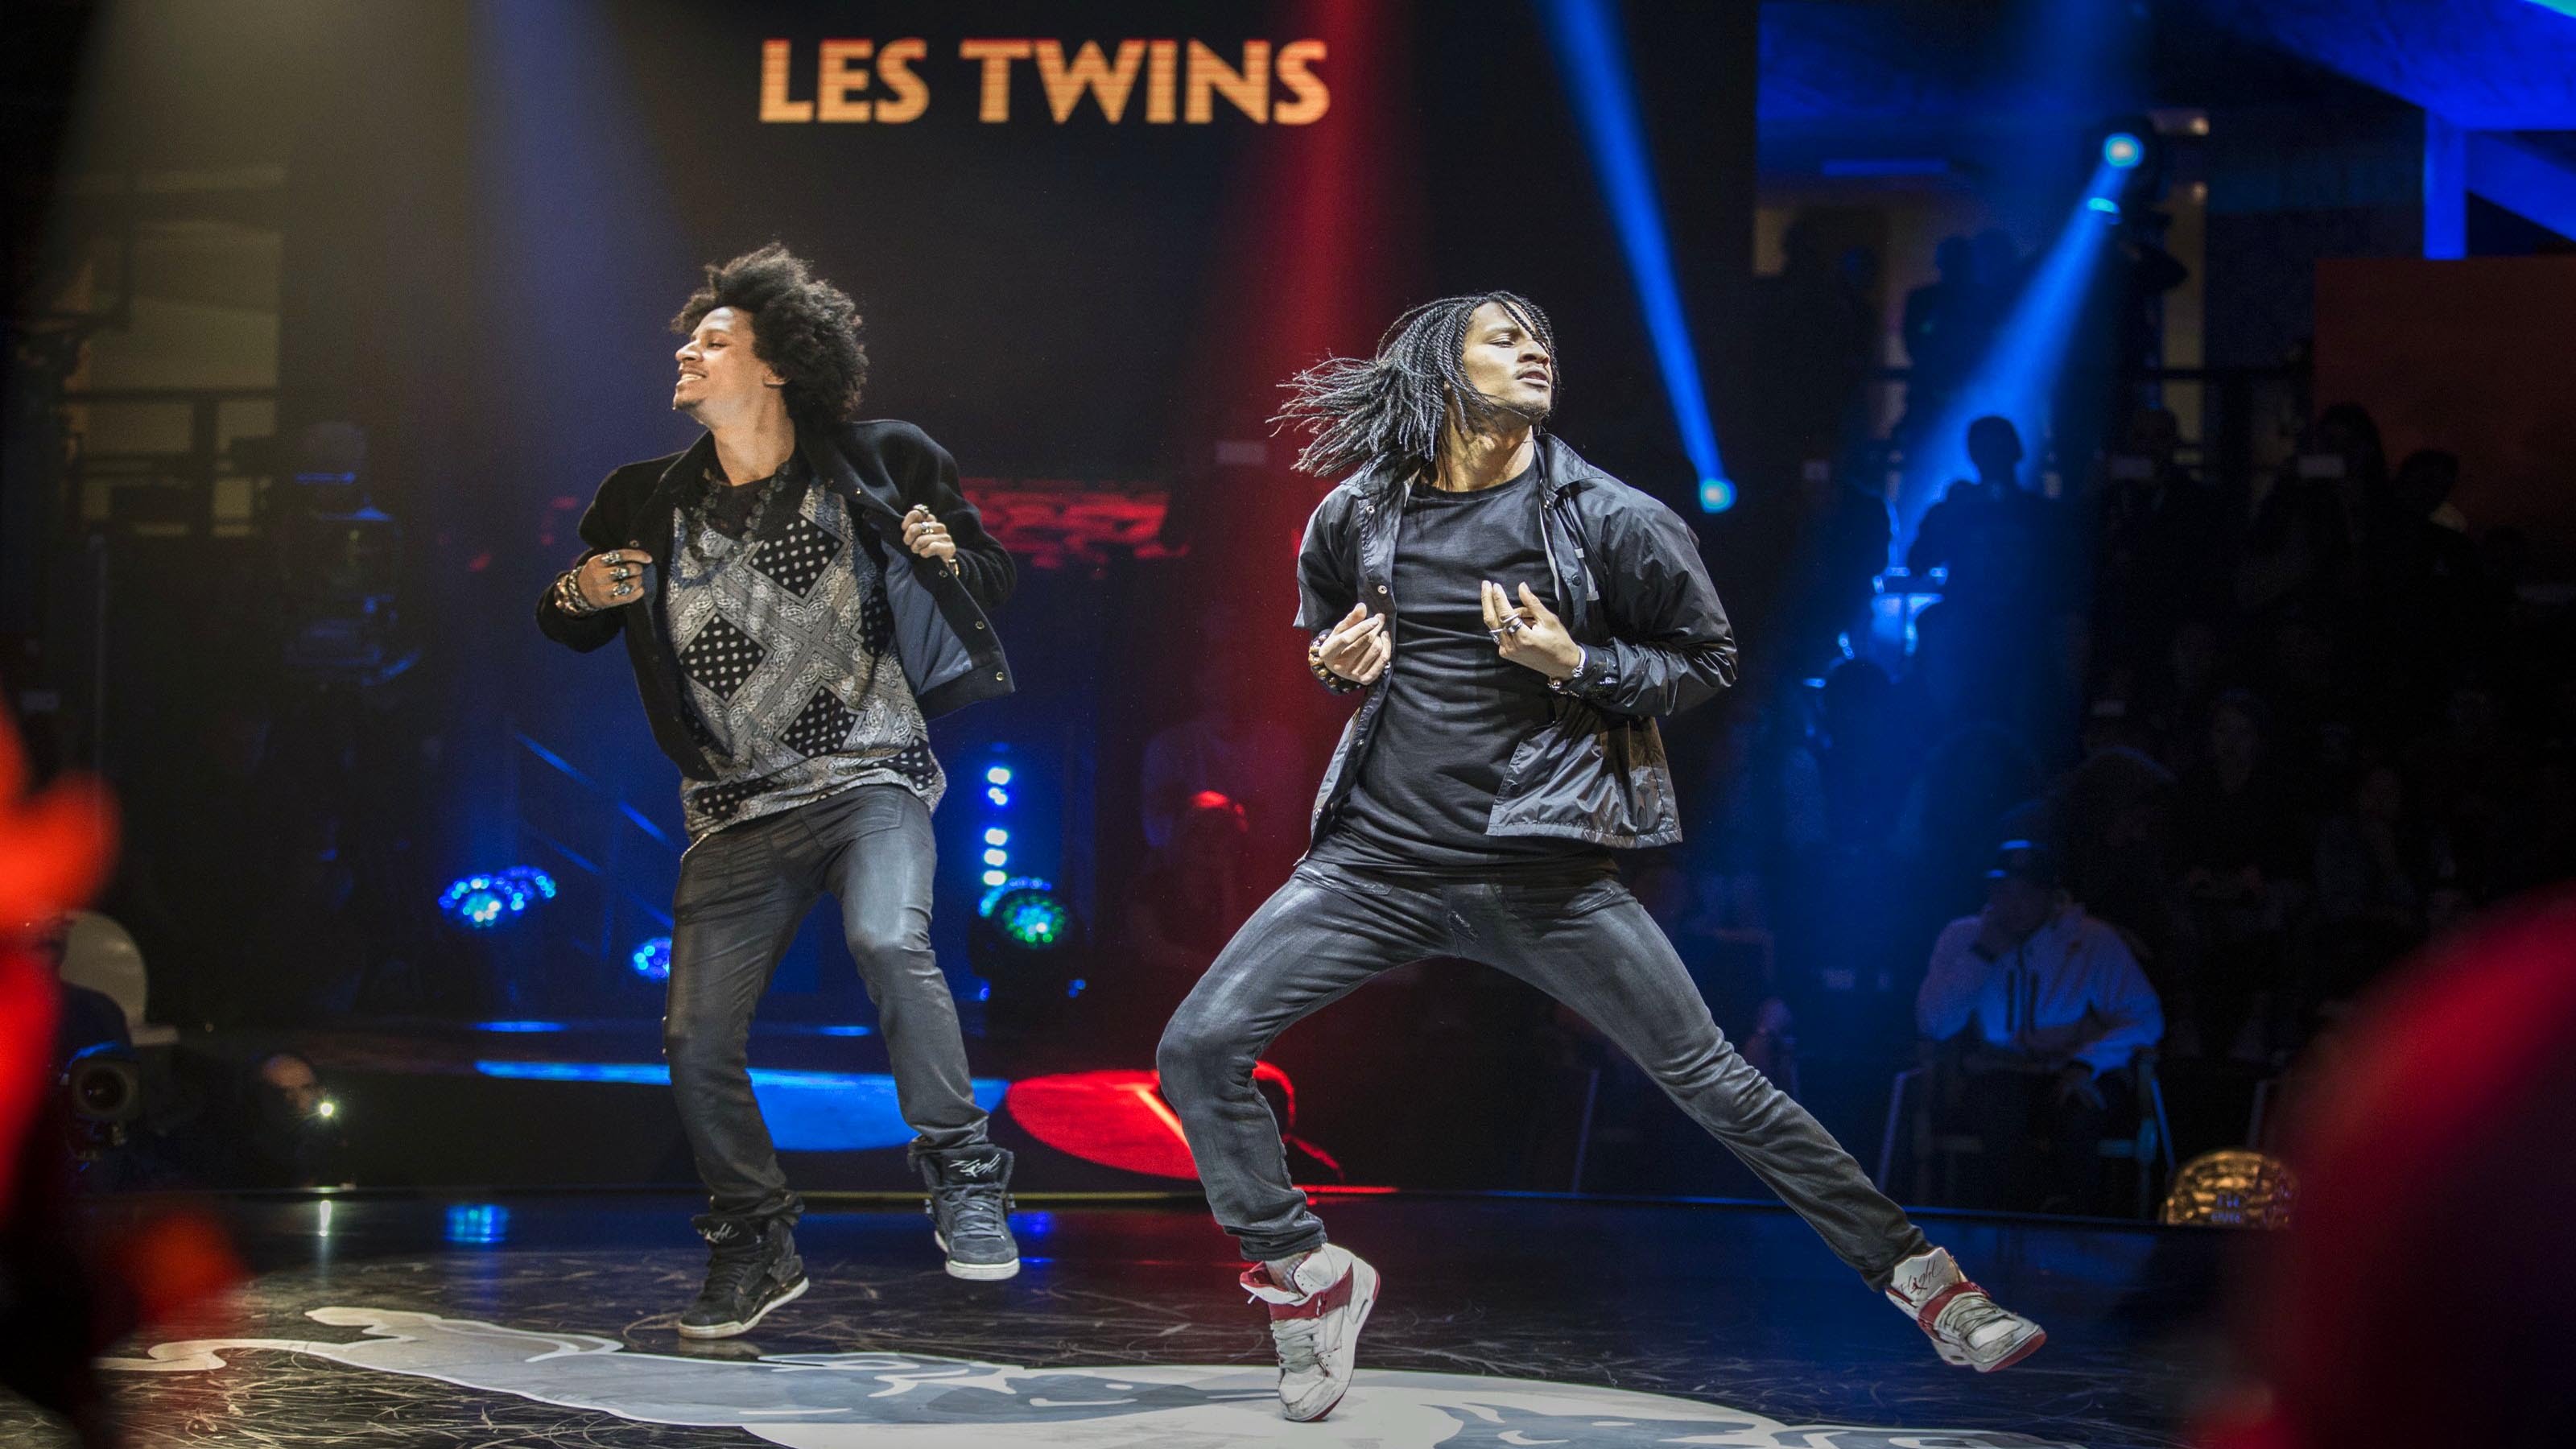 Learn more about Les Twins: Wedding, Girlfriend, Siblings, Brother, Family,...